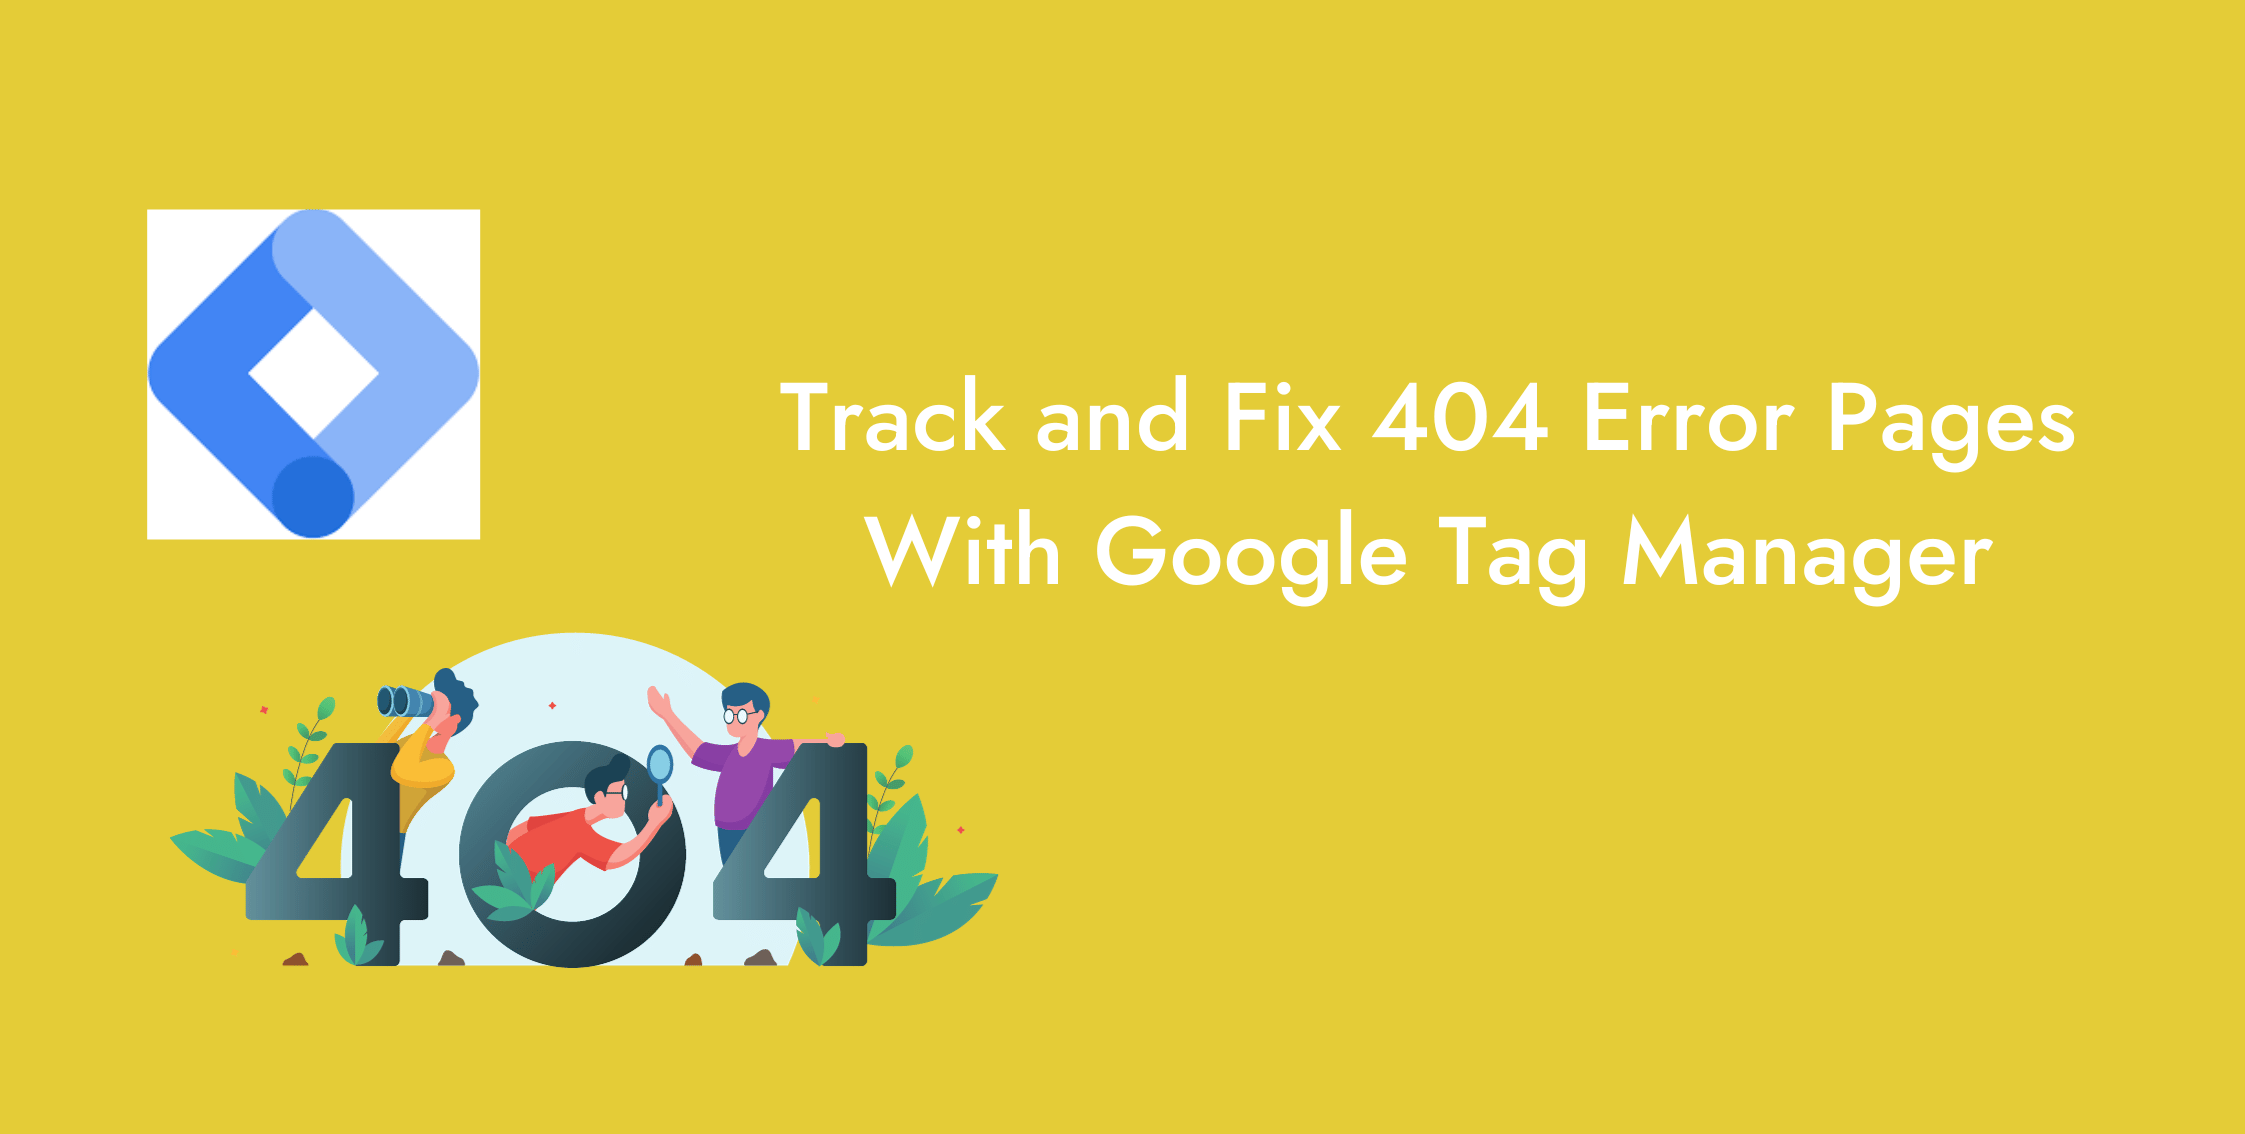 How to Track and Fix 404 Error Pages With GTM?